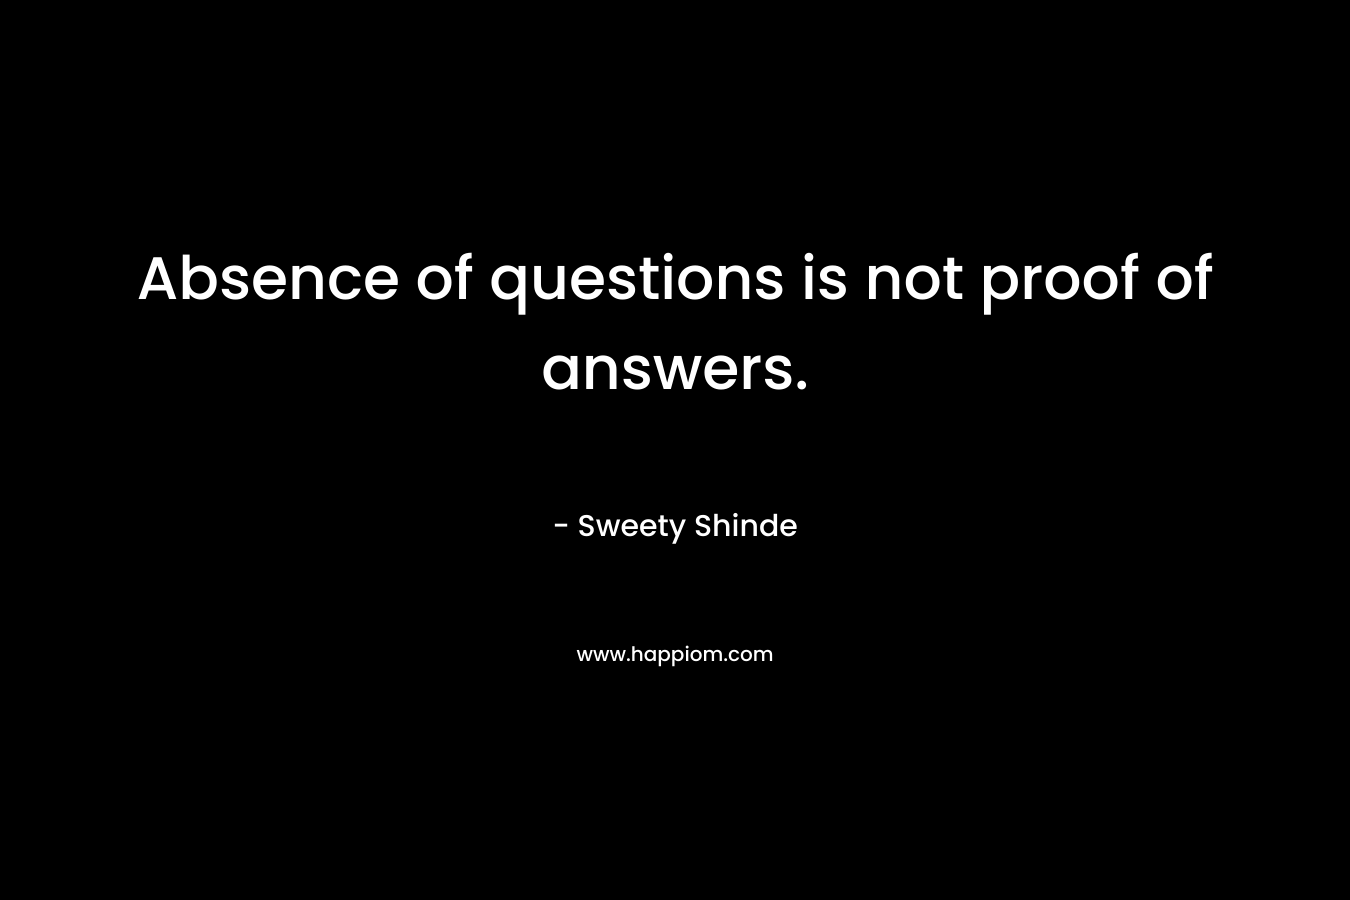 Absence of questions is not proof of answers. – Sweety Shinde